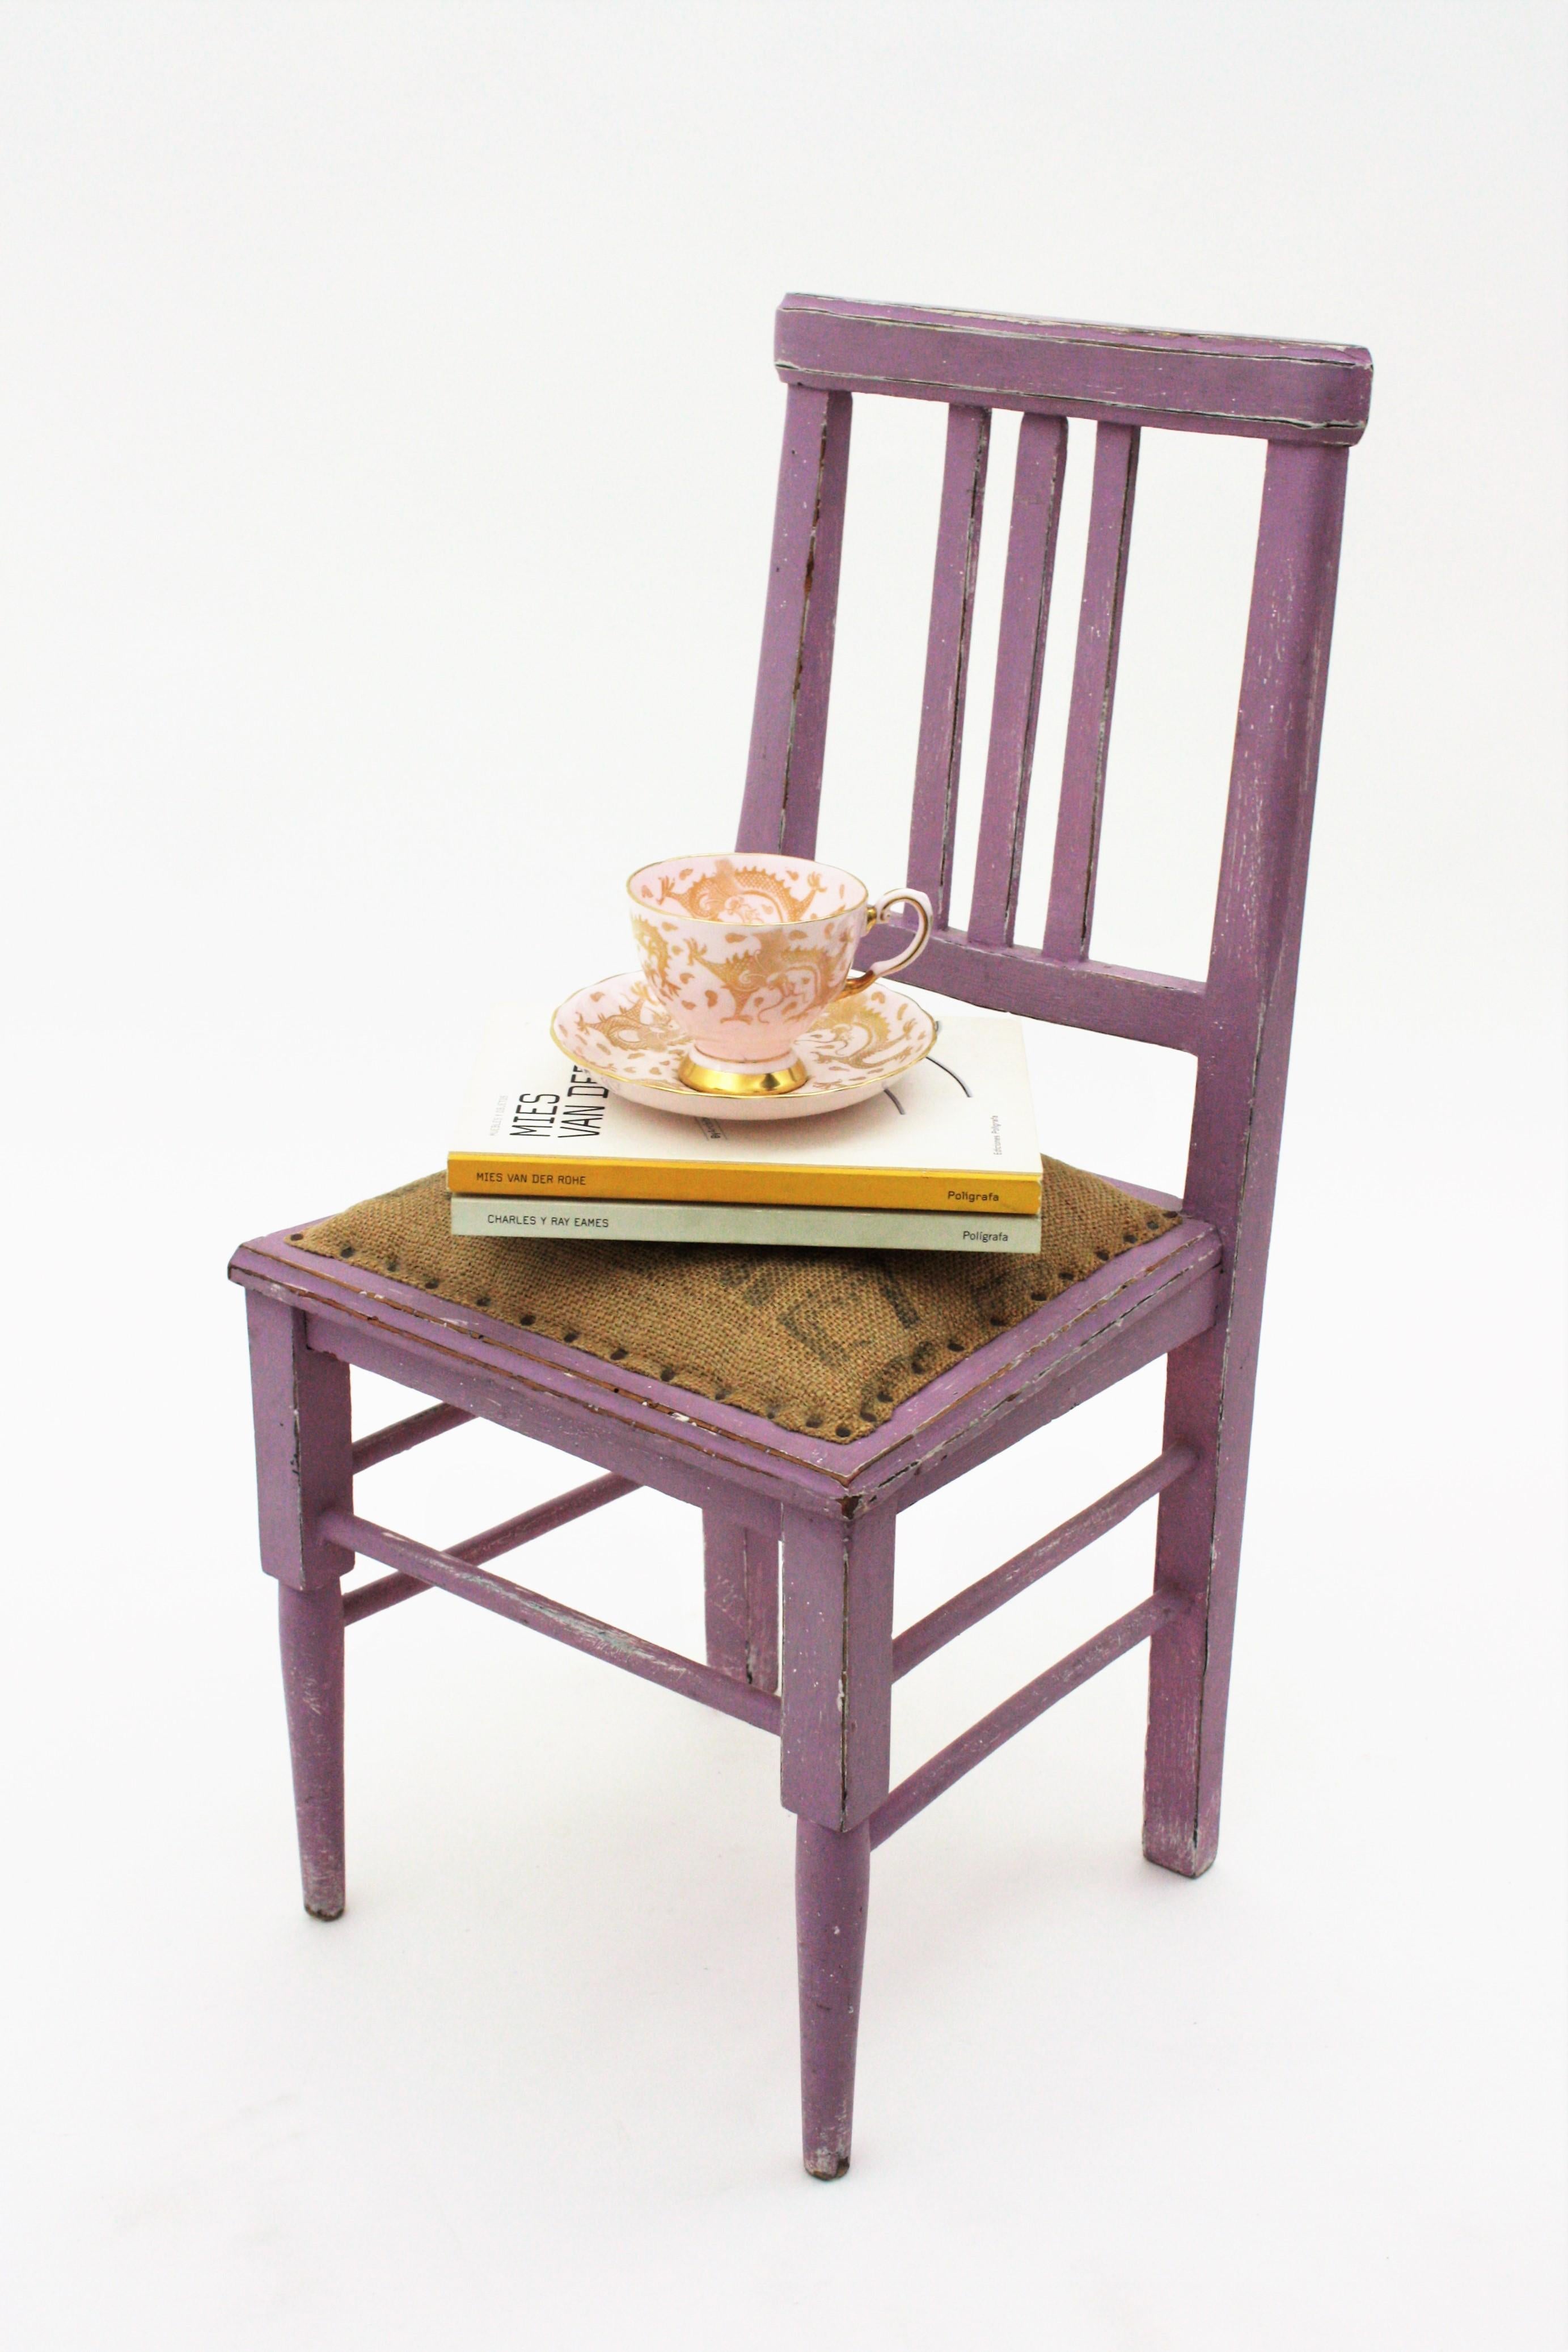 French Provincial French Provencal Kids Chair in Lavender Patina and Burlap Seat For Sale